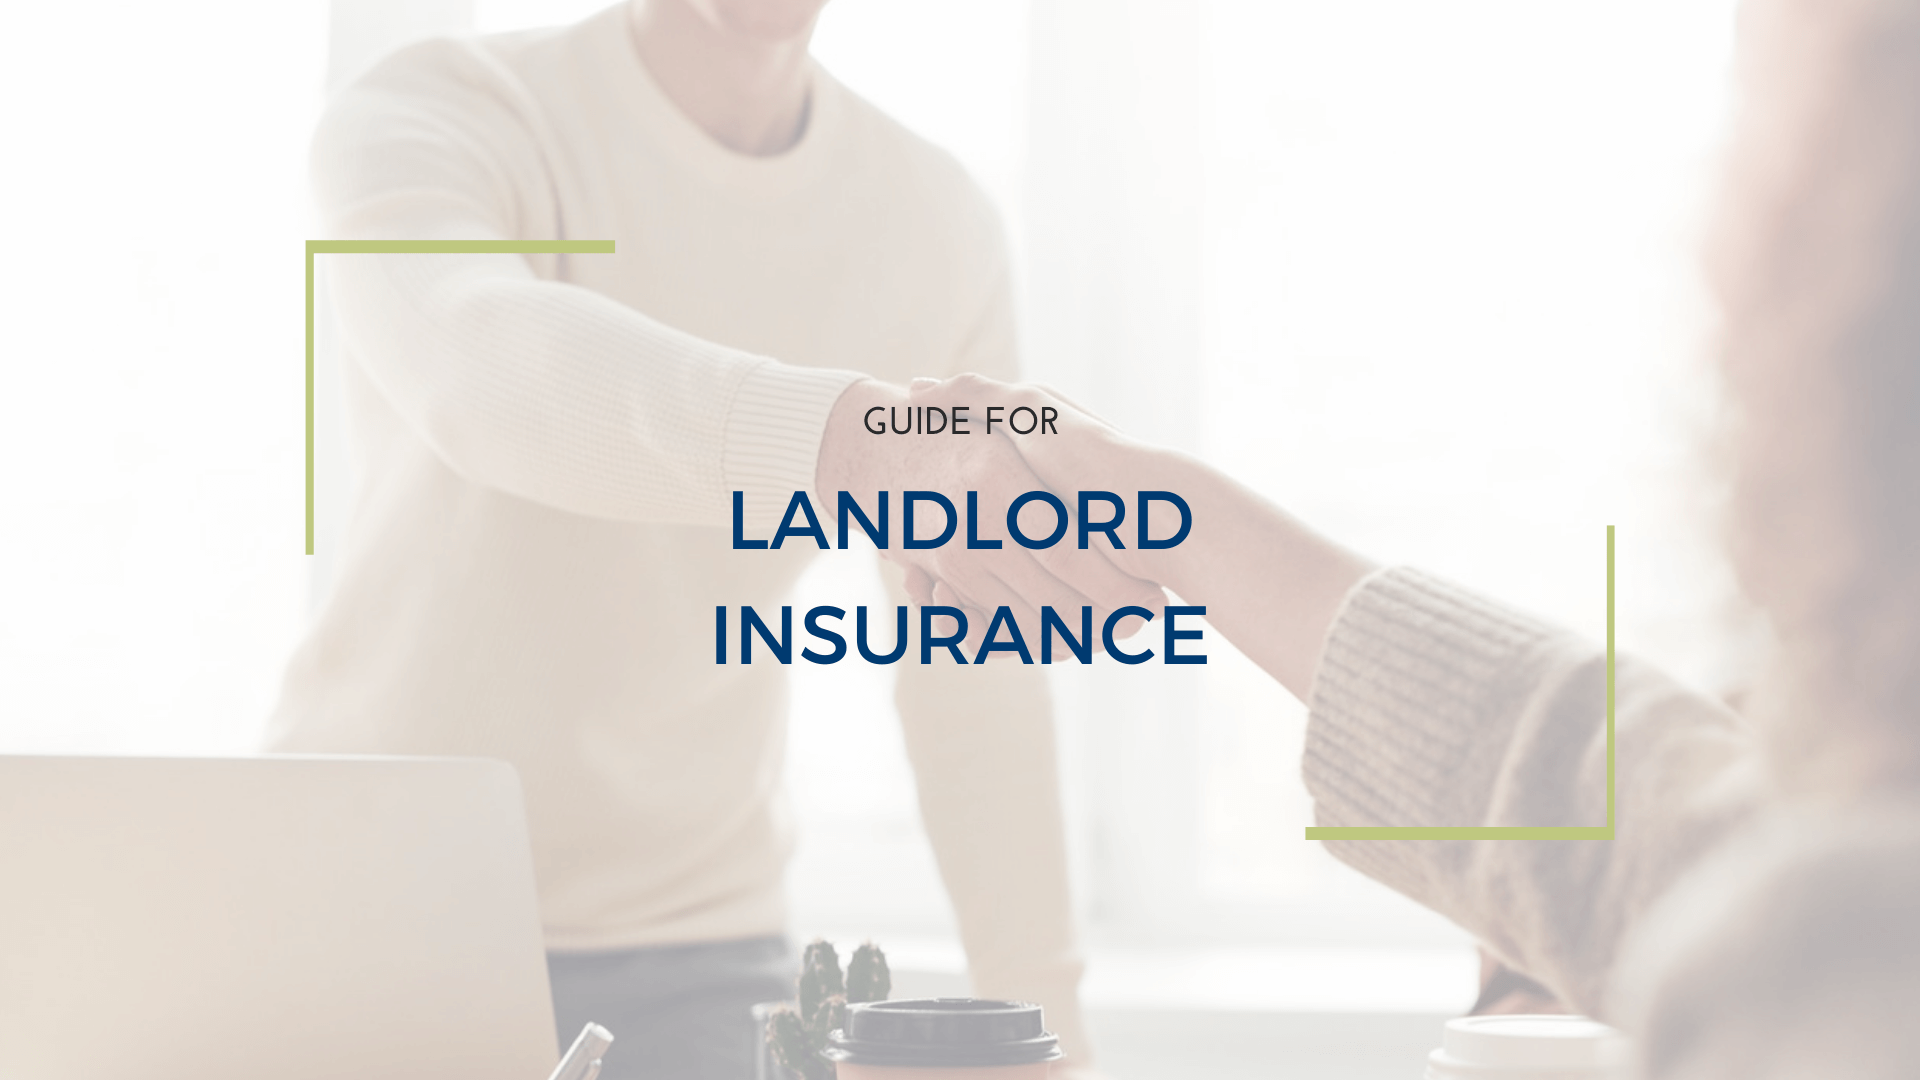 Landlord Insurance: The Ultimate Guide for Dayton Property Owners